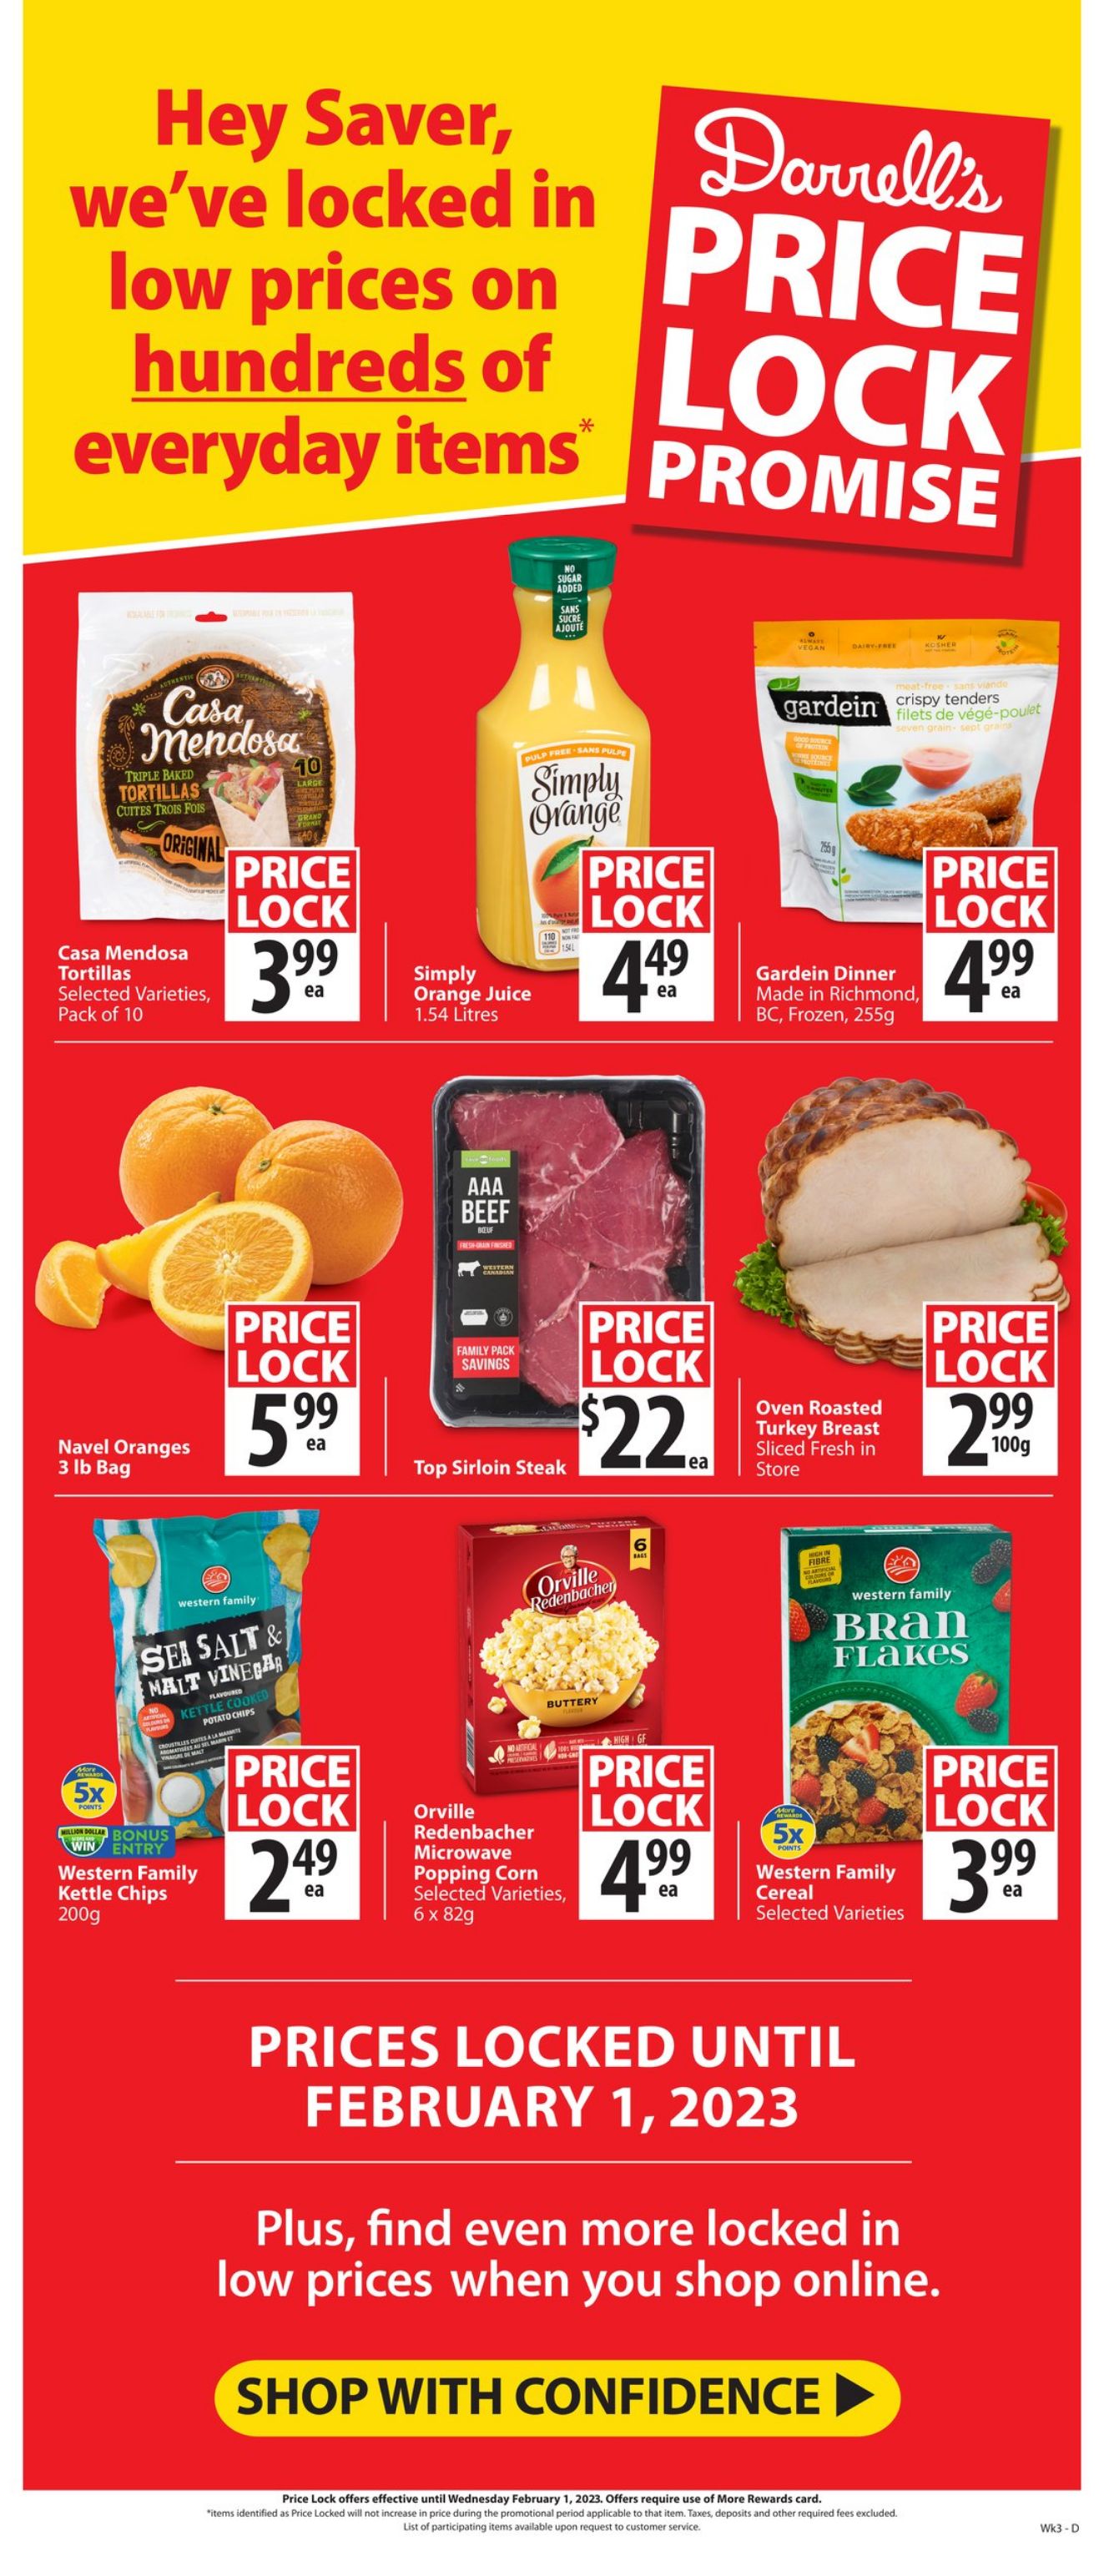 Flyer Save-On-Foods 19.01.2023 - 25.01.2023